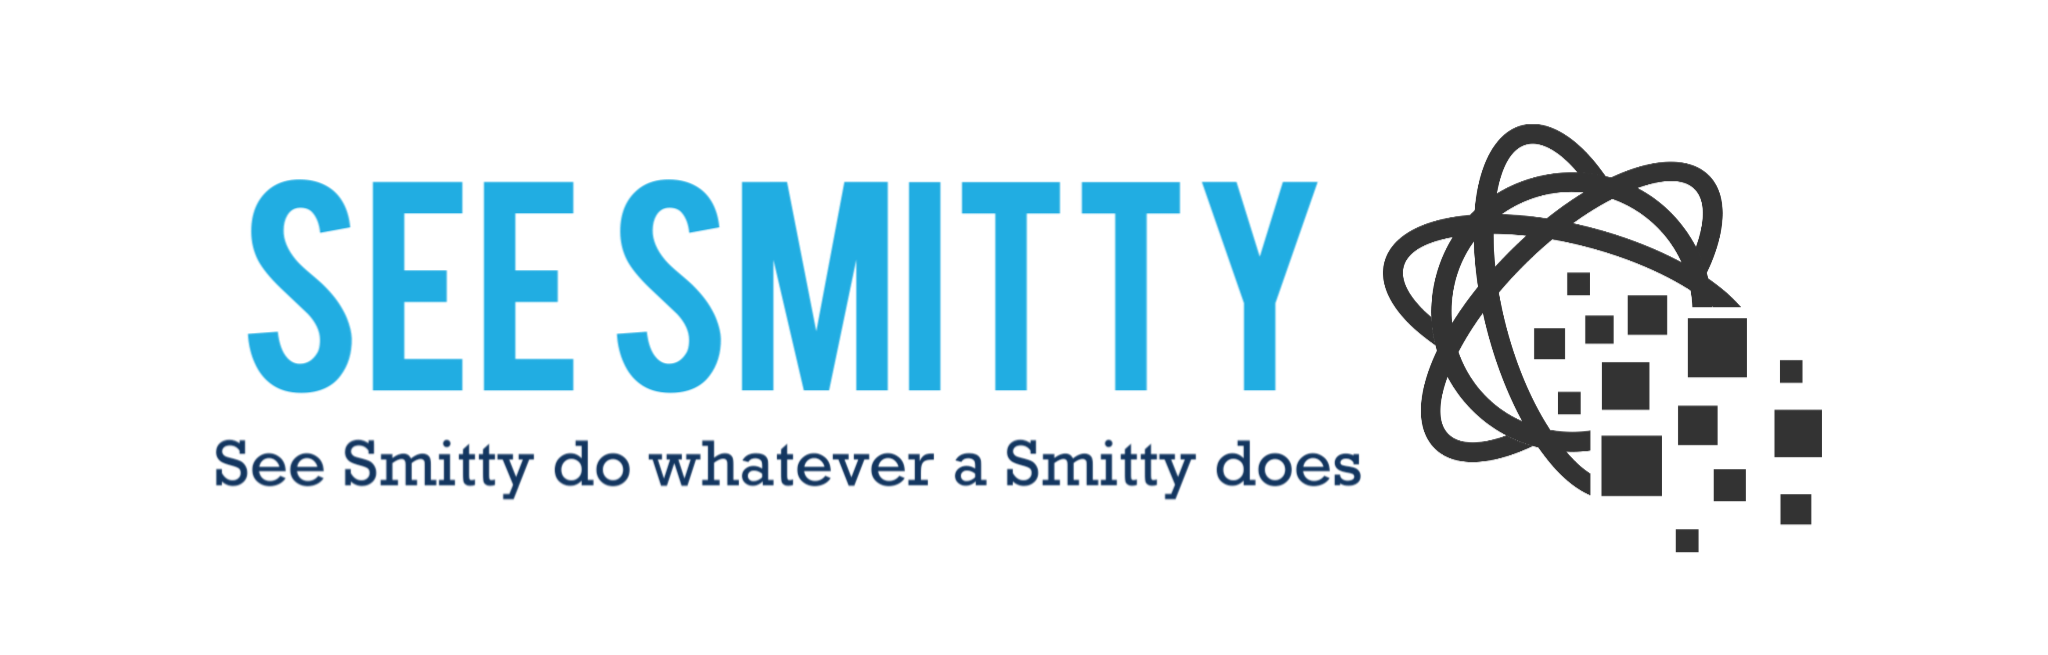 See Smitty…